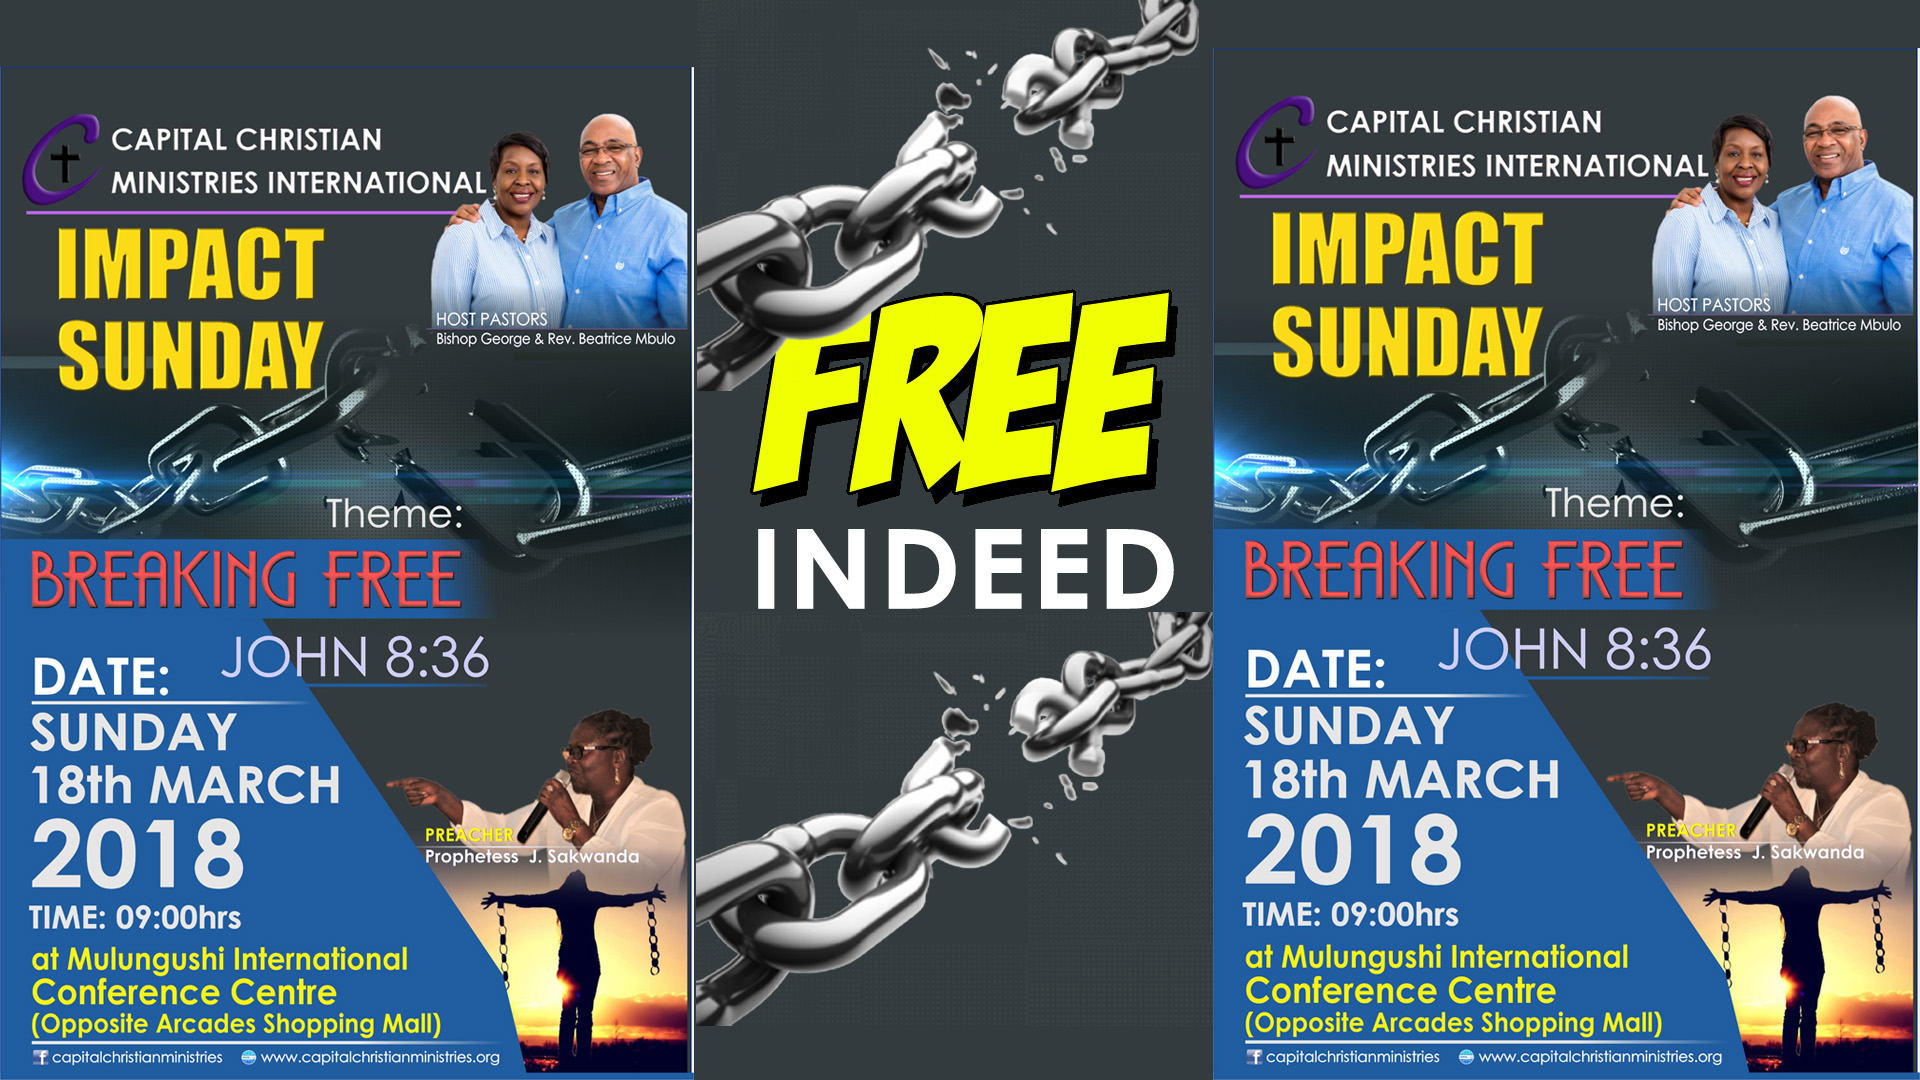 facebook-event-cover-photo-capital-christian-ministries-international